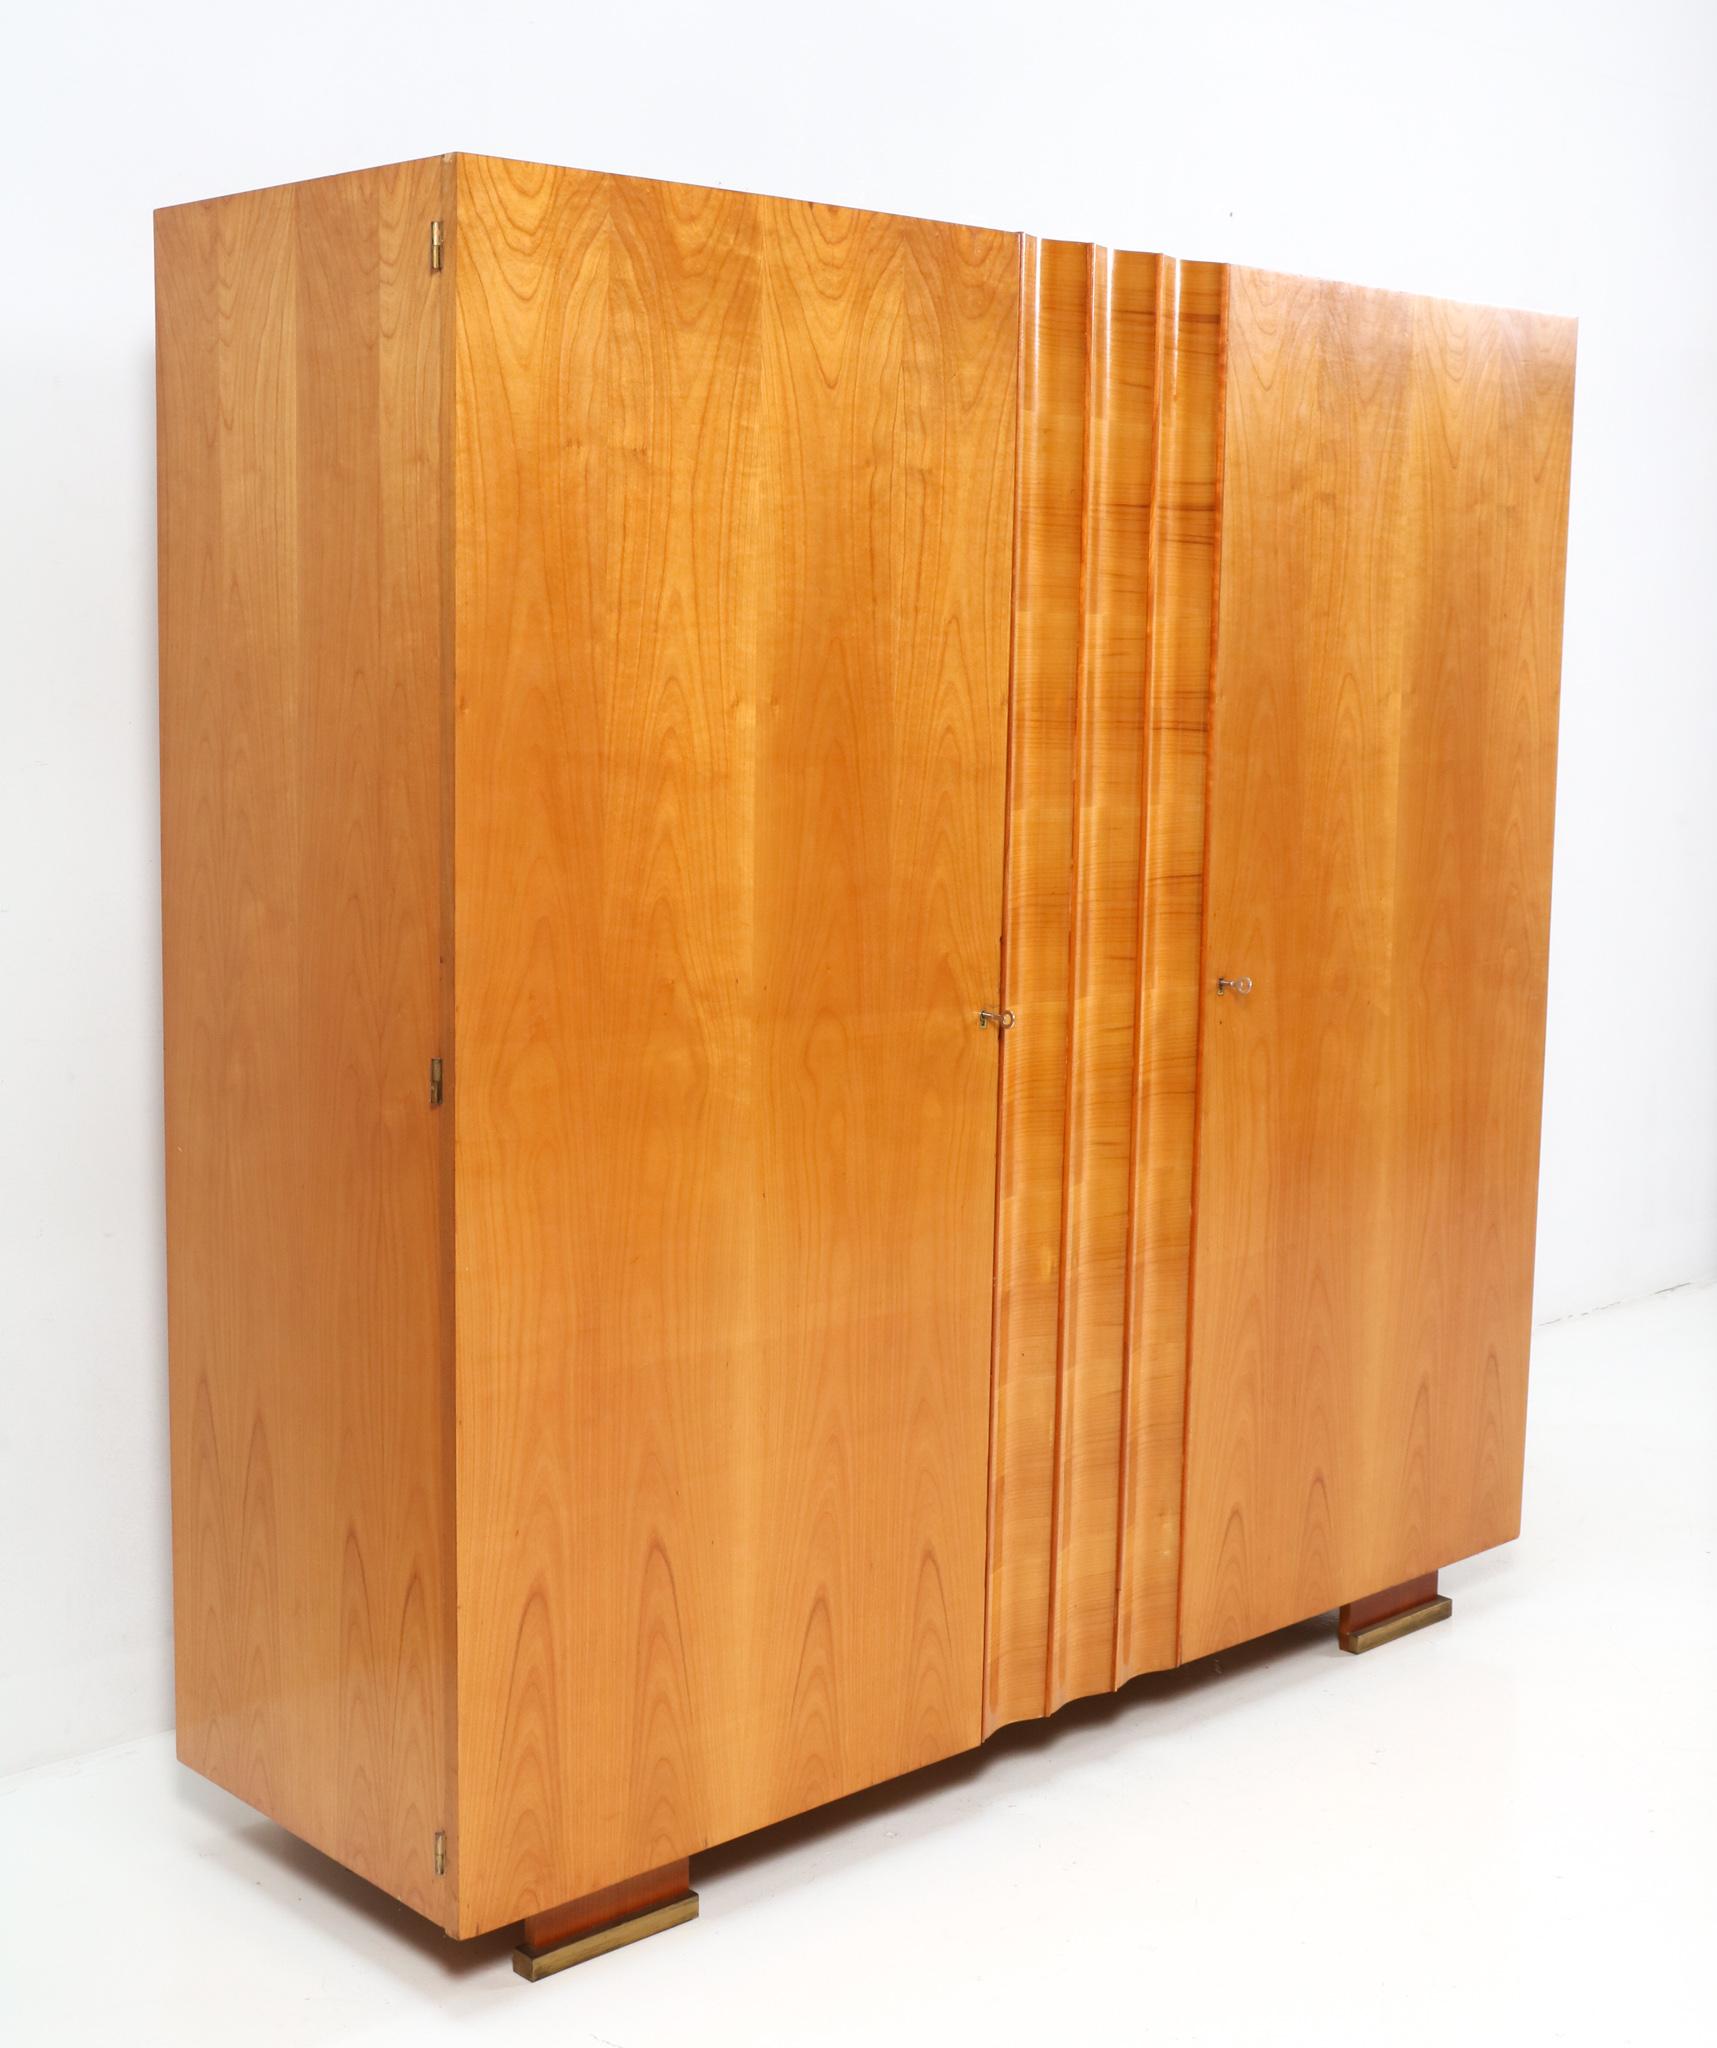 Magnificent and rare Art Deco armoire or wardrobe.
Design by De Coene Frères Kortrijk.
Striking Belgium design from the 1930s.
Solid cherry and original cherry veneer with brass details at the front feet.
Behind the left door with the original